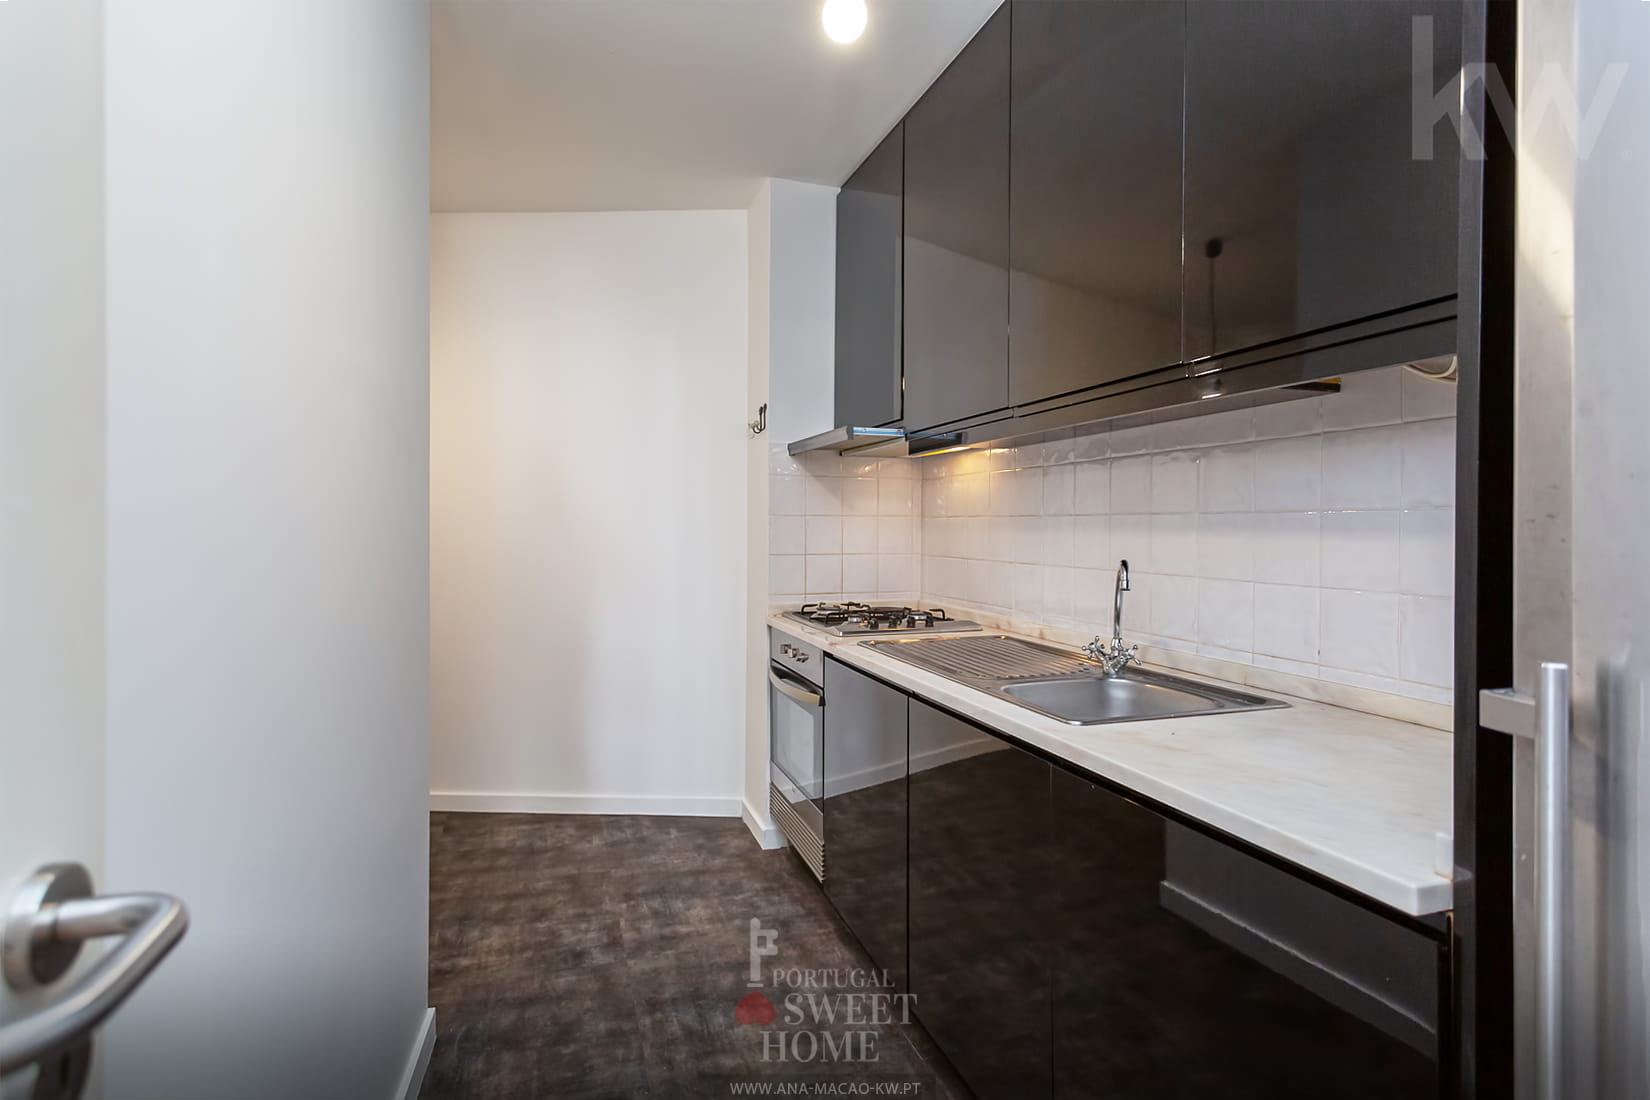 Kitchen (11.2 m2) fully renovated and equipped